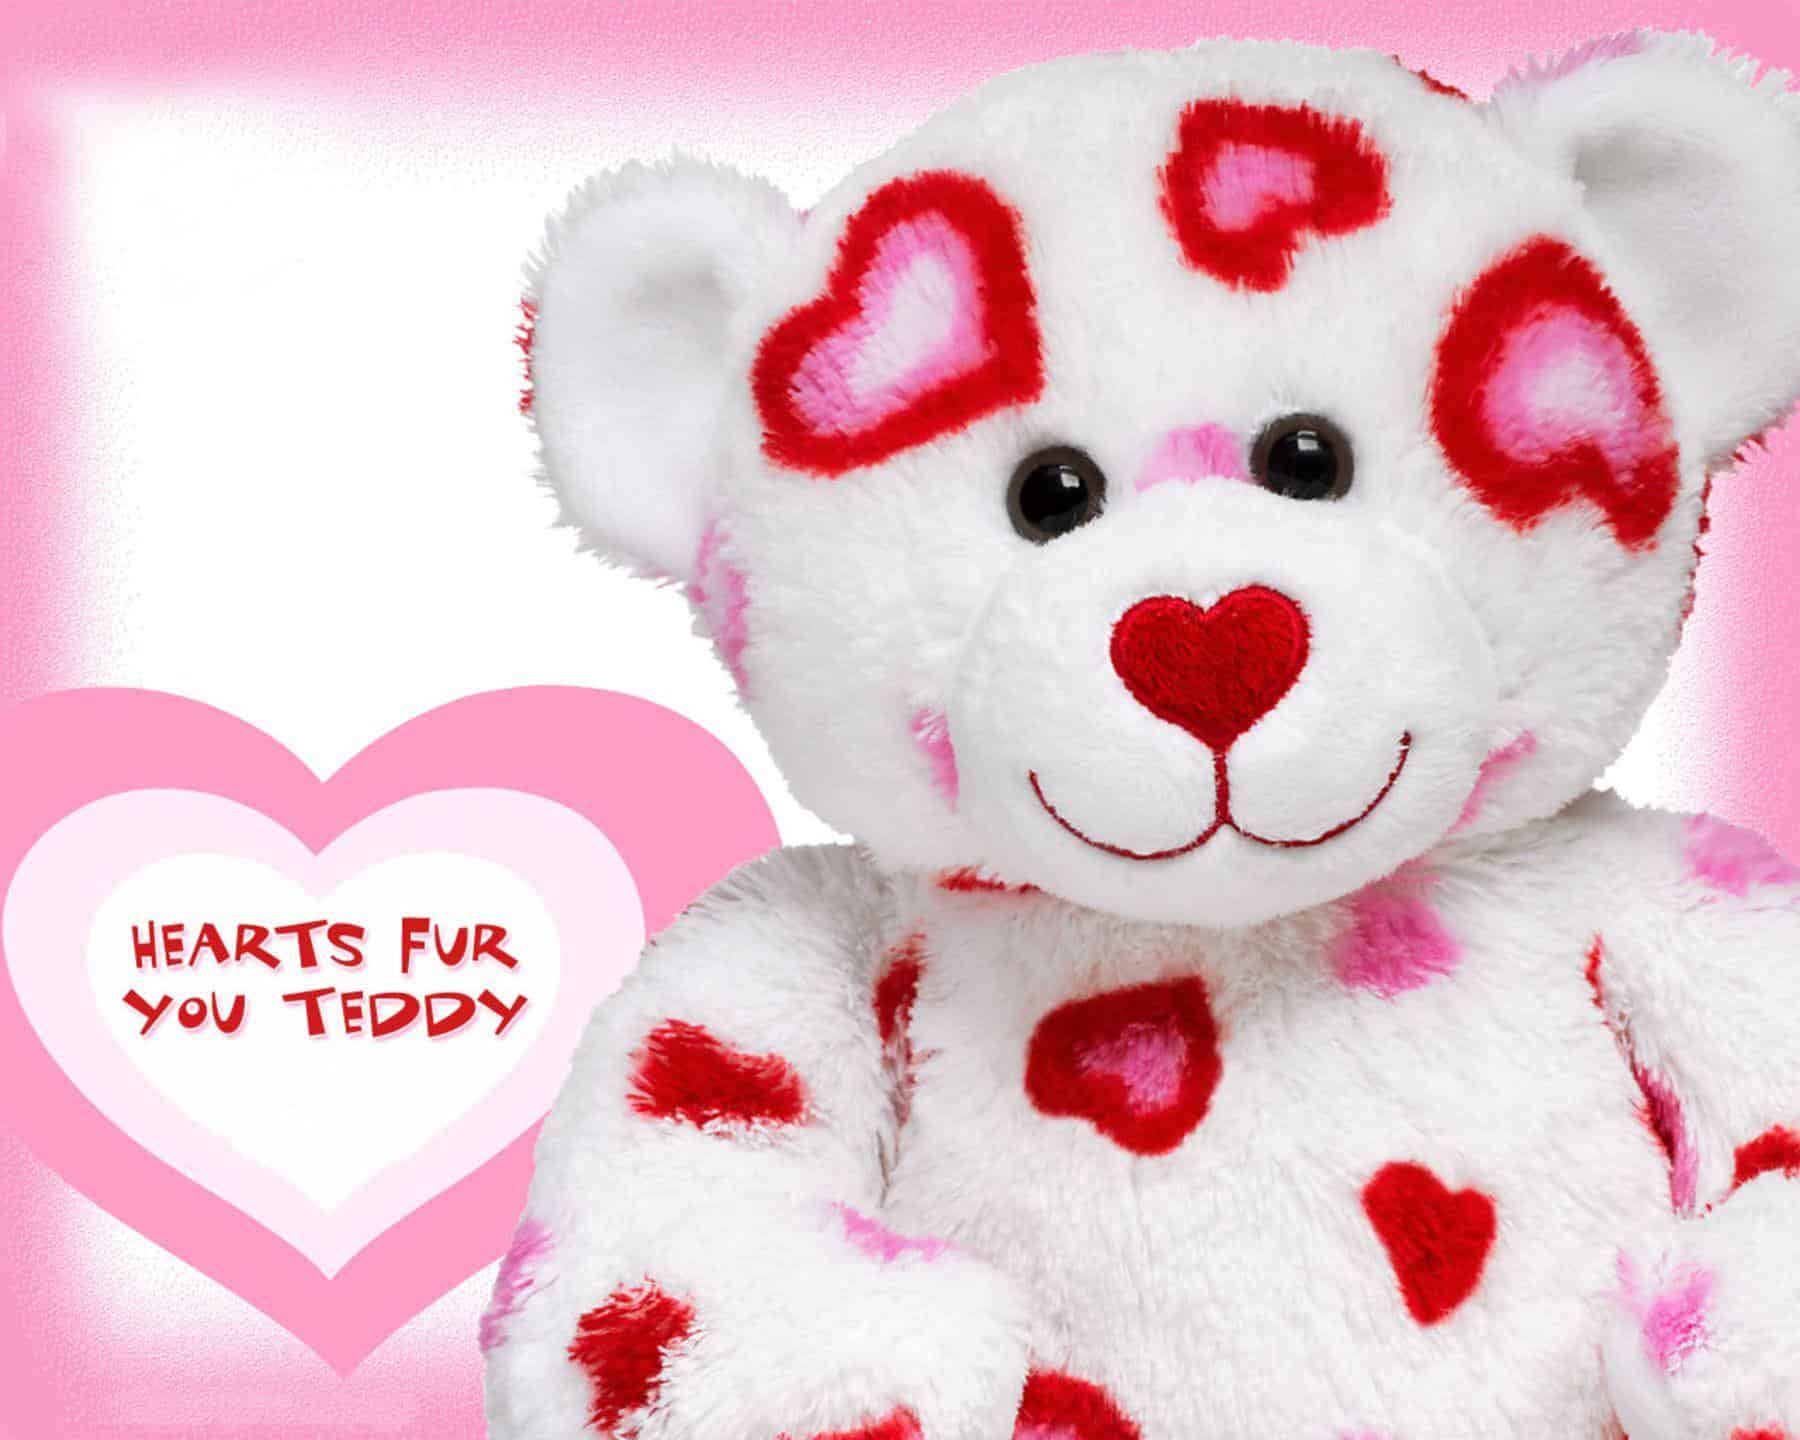 10 Feb Teddy Day Images